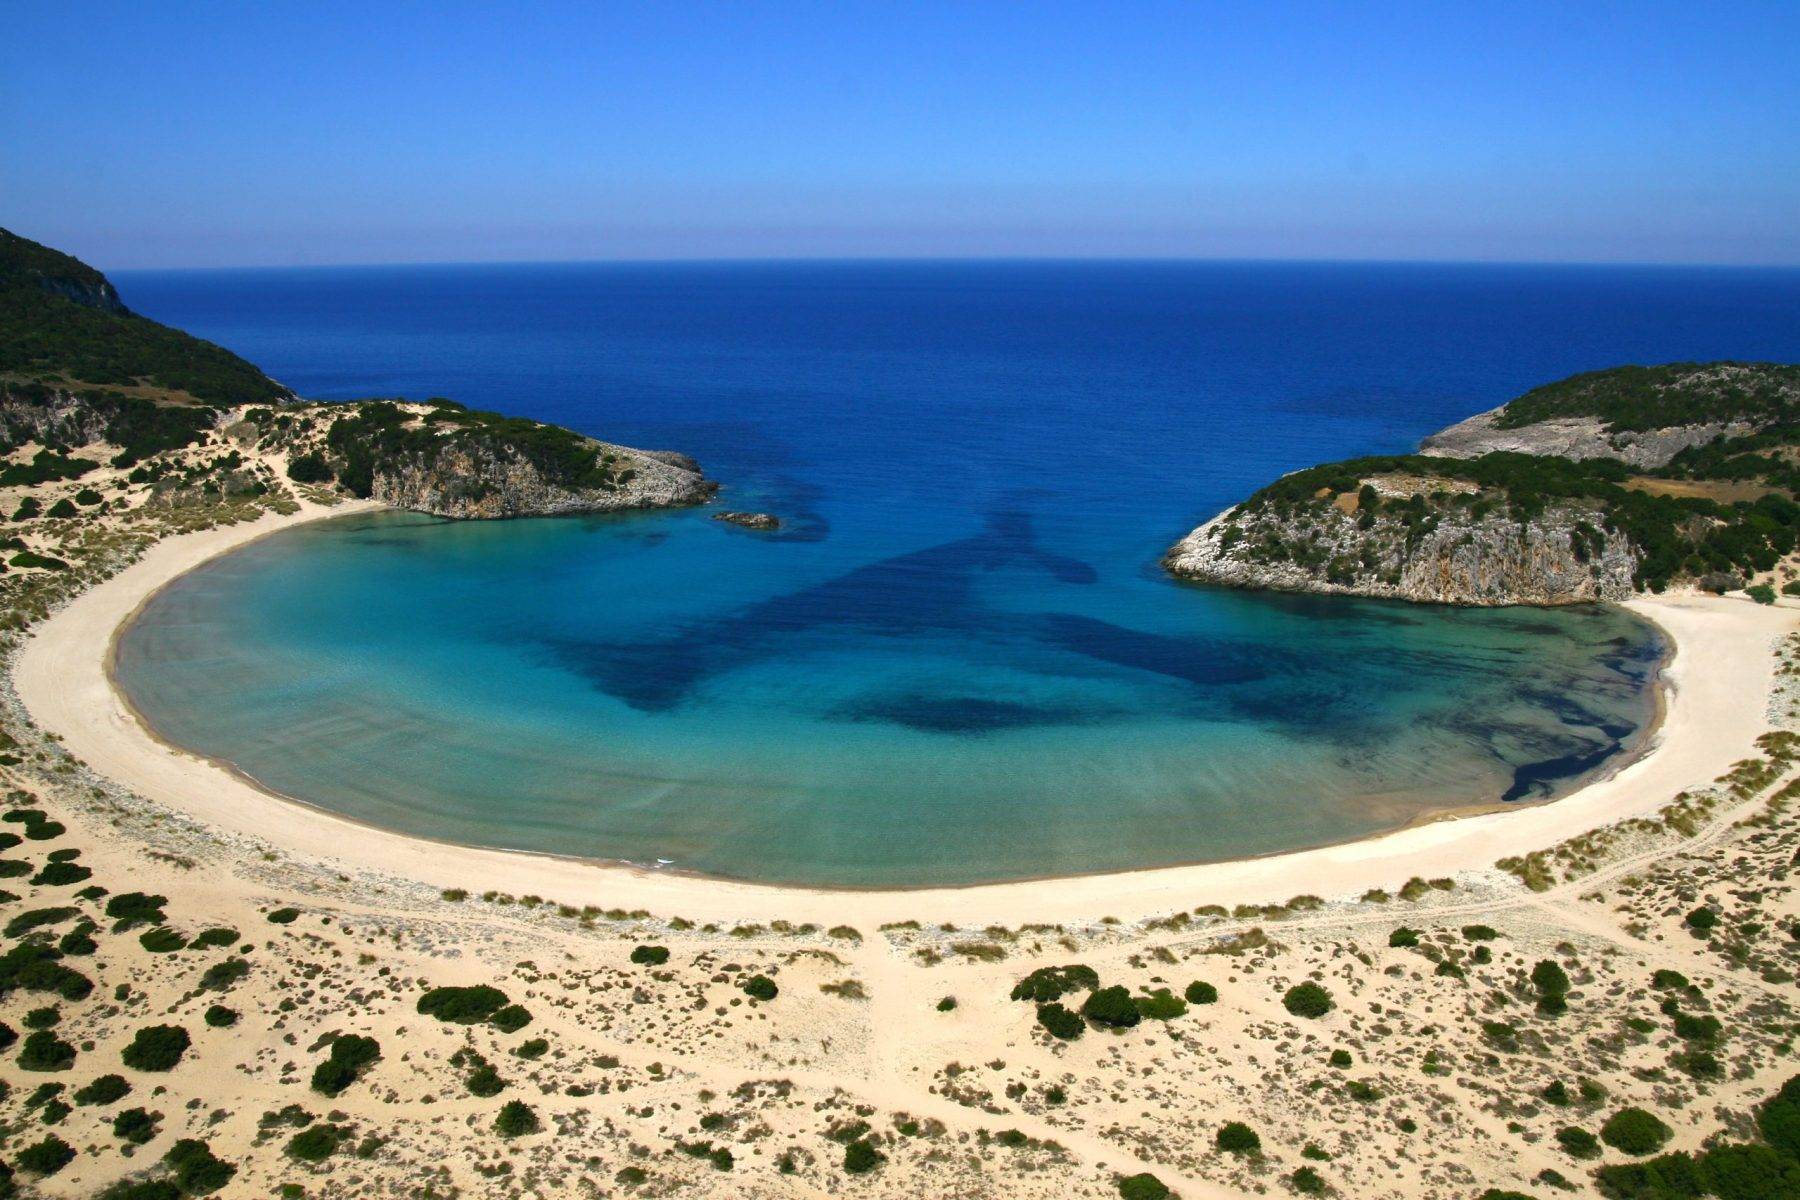 English: Voidokilia is one of the most famous beaches in Messenia which is part of the Peloponnese, Greece.